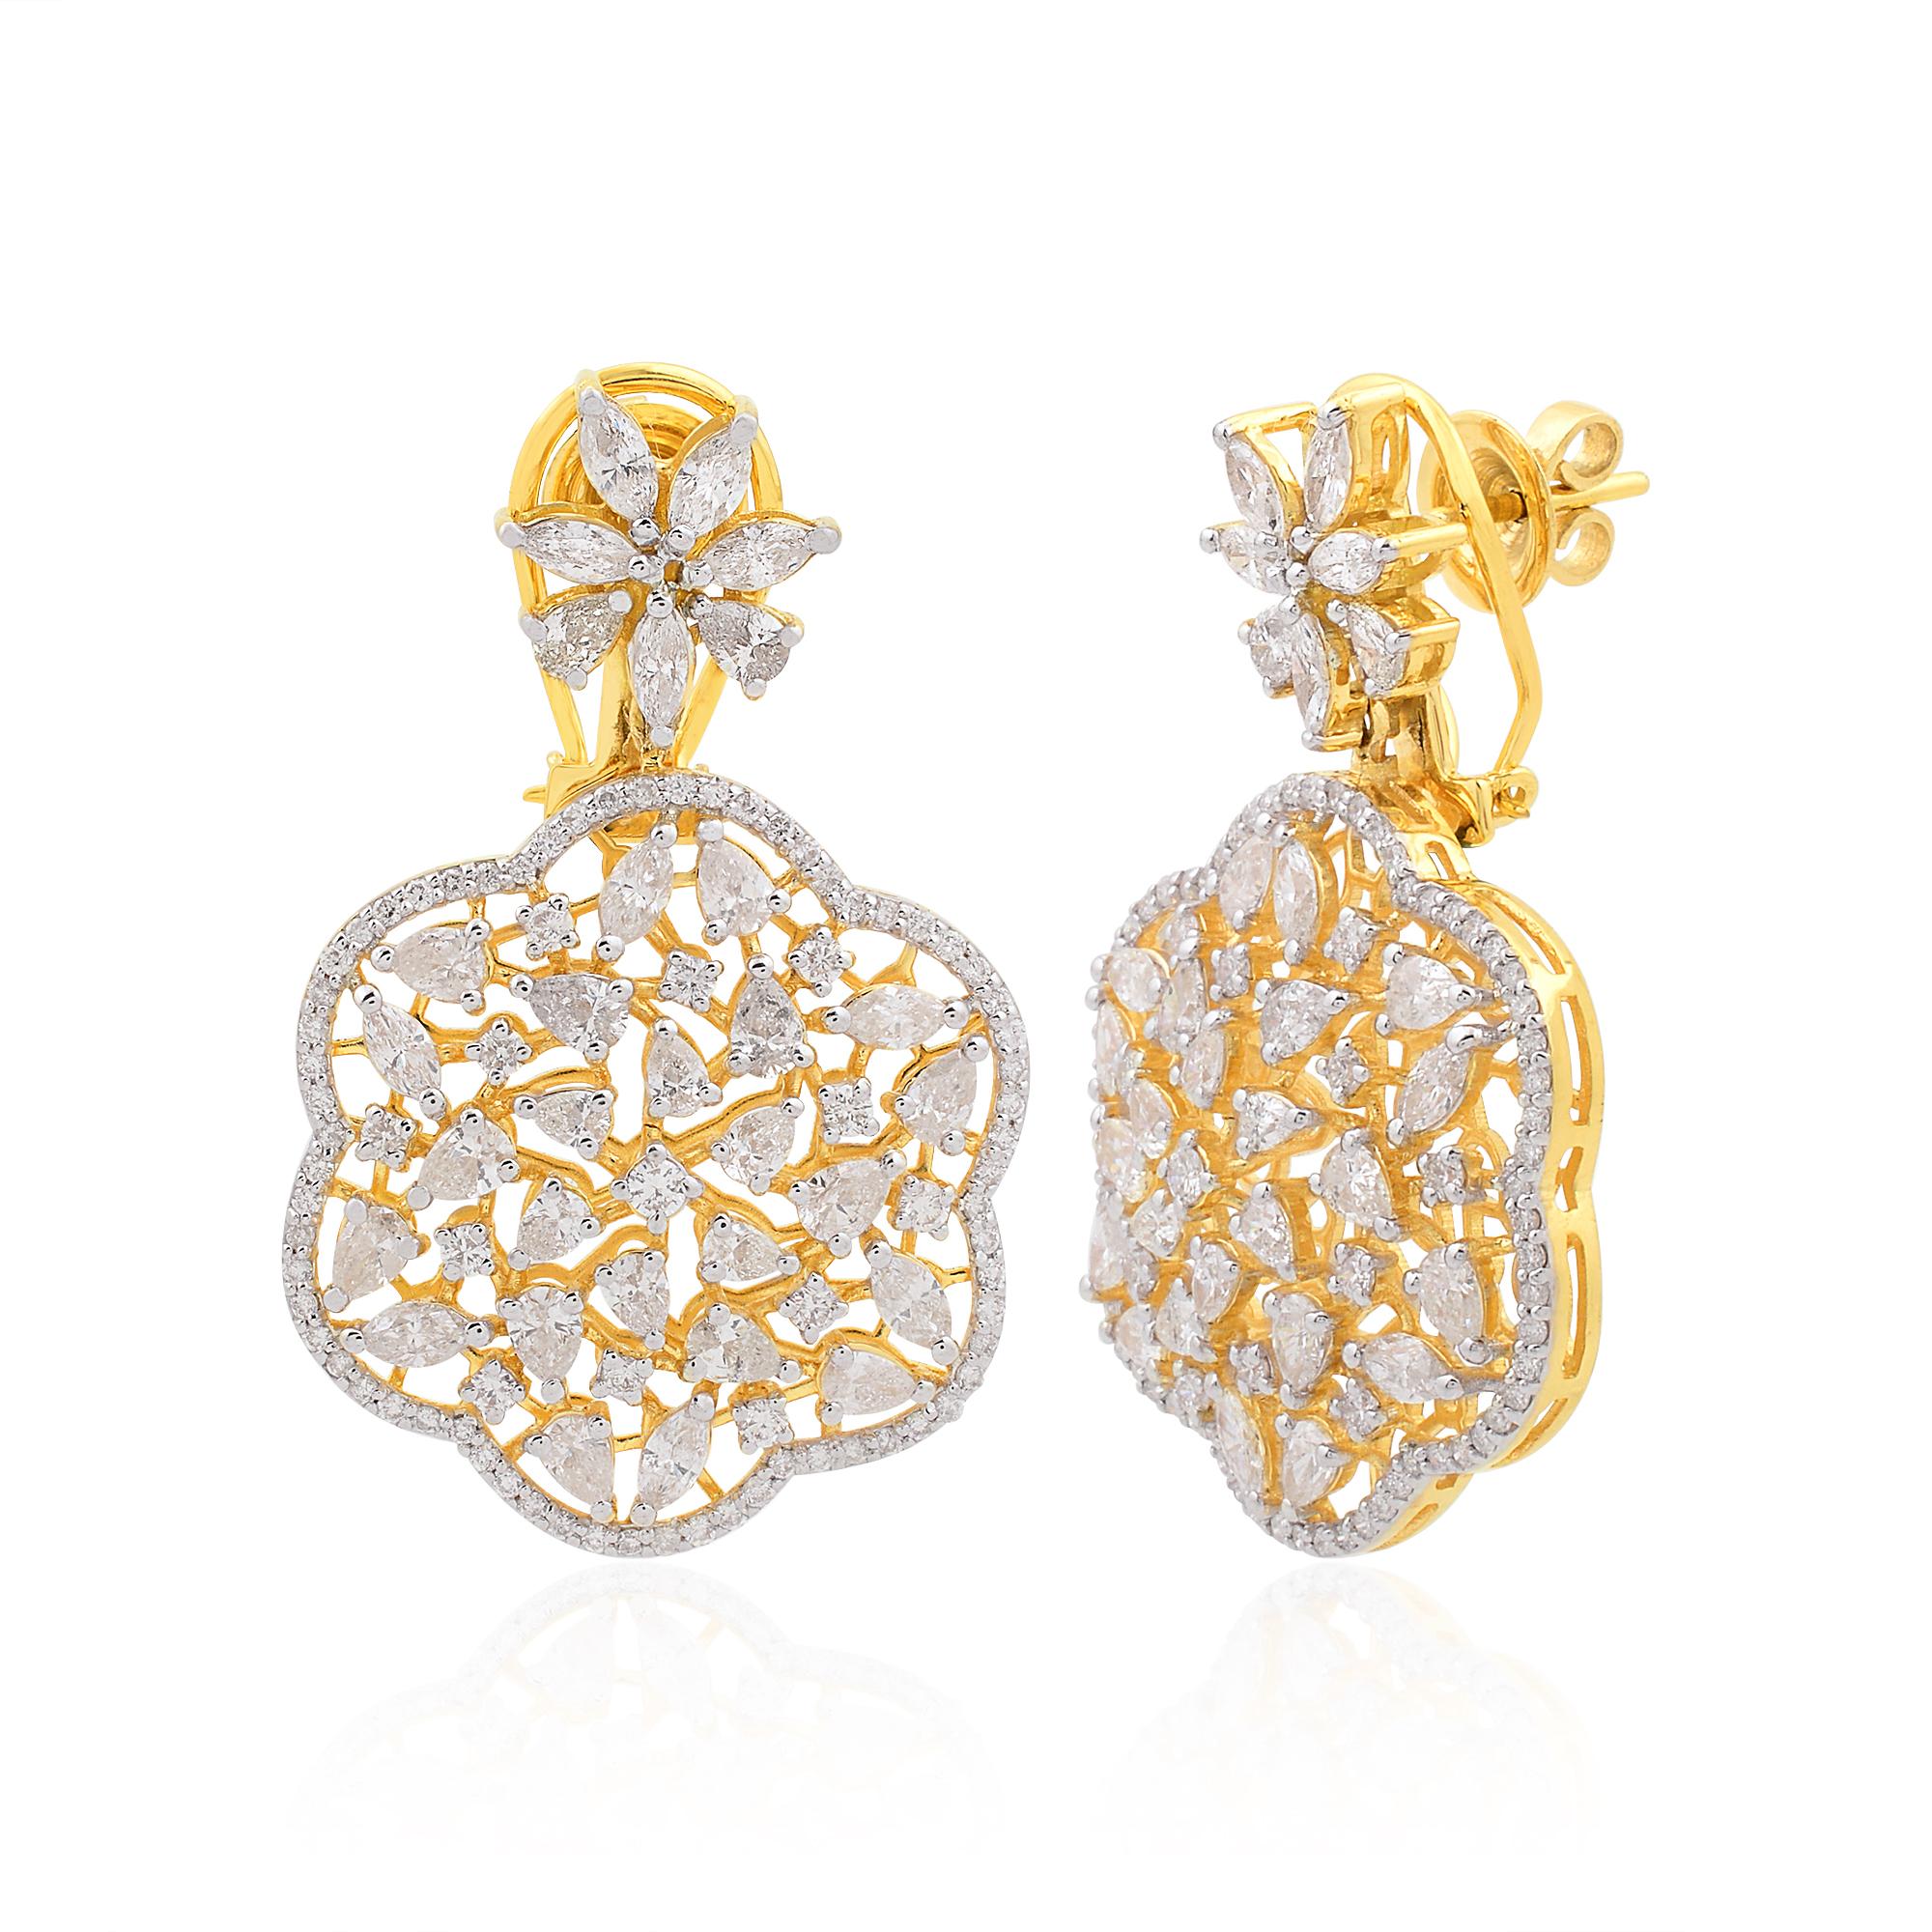 Item Code :- SEE-11084A
Gross Wt. :- 18.47 gm
18k Yellow Gold Wt. :- 17.32 gm
Diamond Wt. :- 5.76 Ct. ( AVERAGE DIAMOND CLARITY SI1-SI2 & COLOR H-I )
Earrings Length :- 37 mm approx.
✦ Sizing
.....................
We can adjust most items to fit